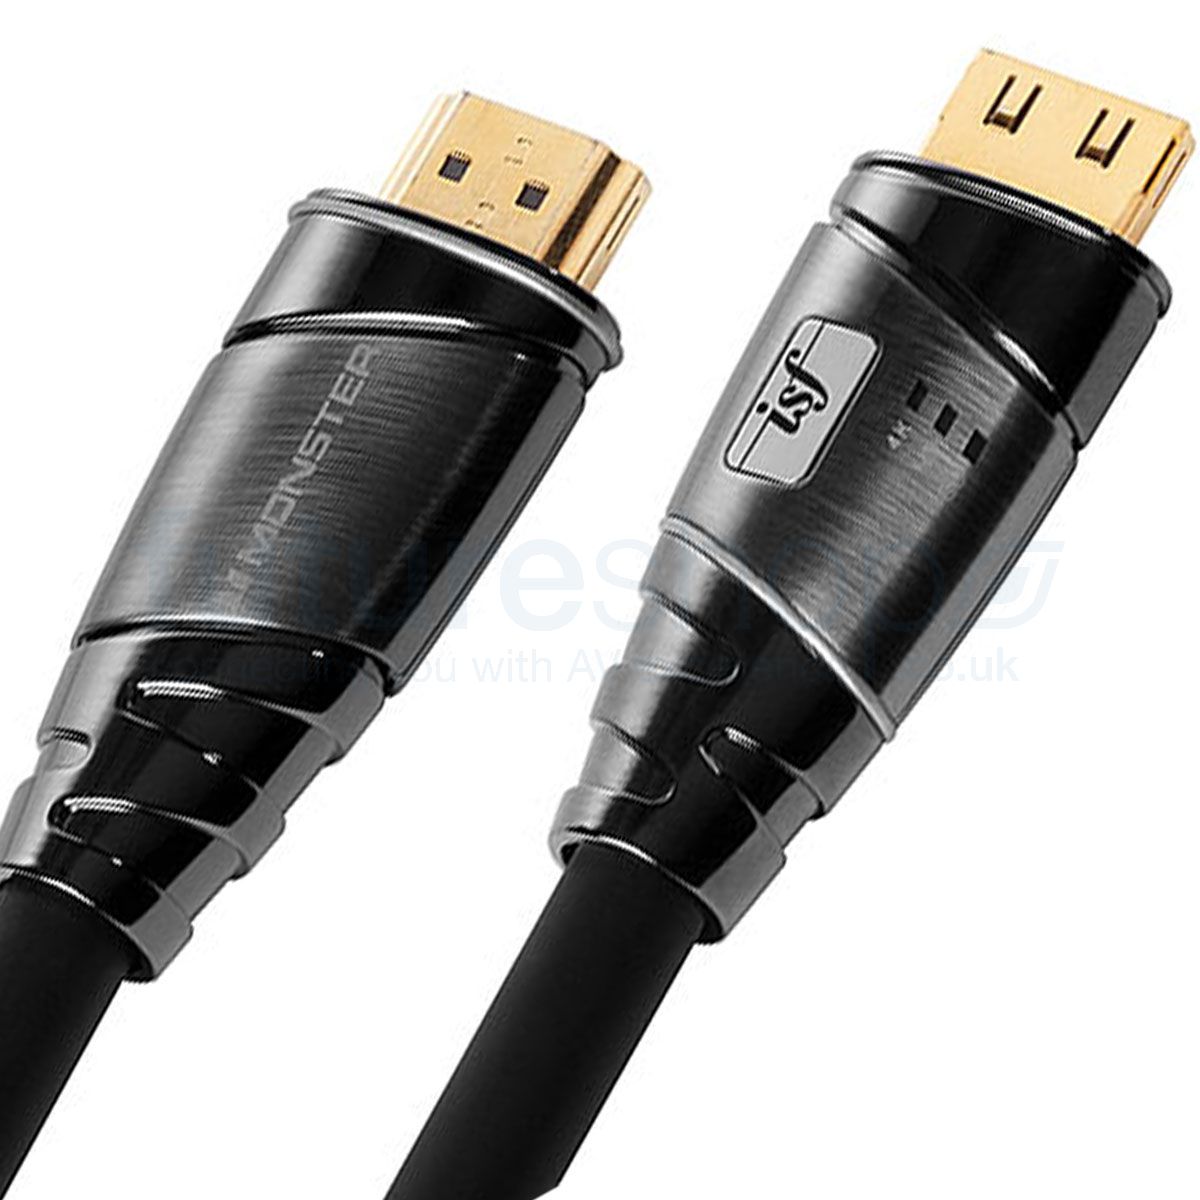 Monster 2000HD Hyper Speed HDMI Cable 4.8m